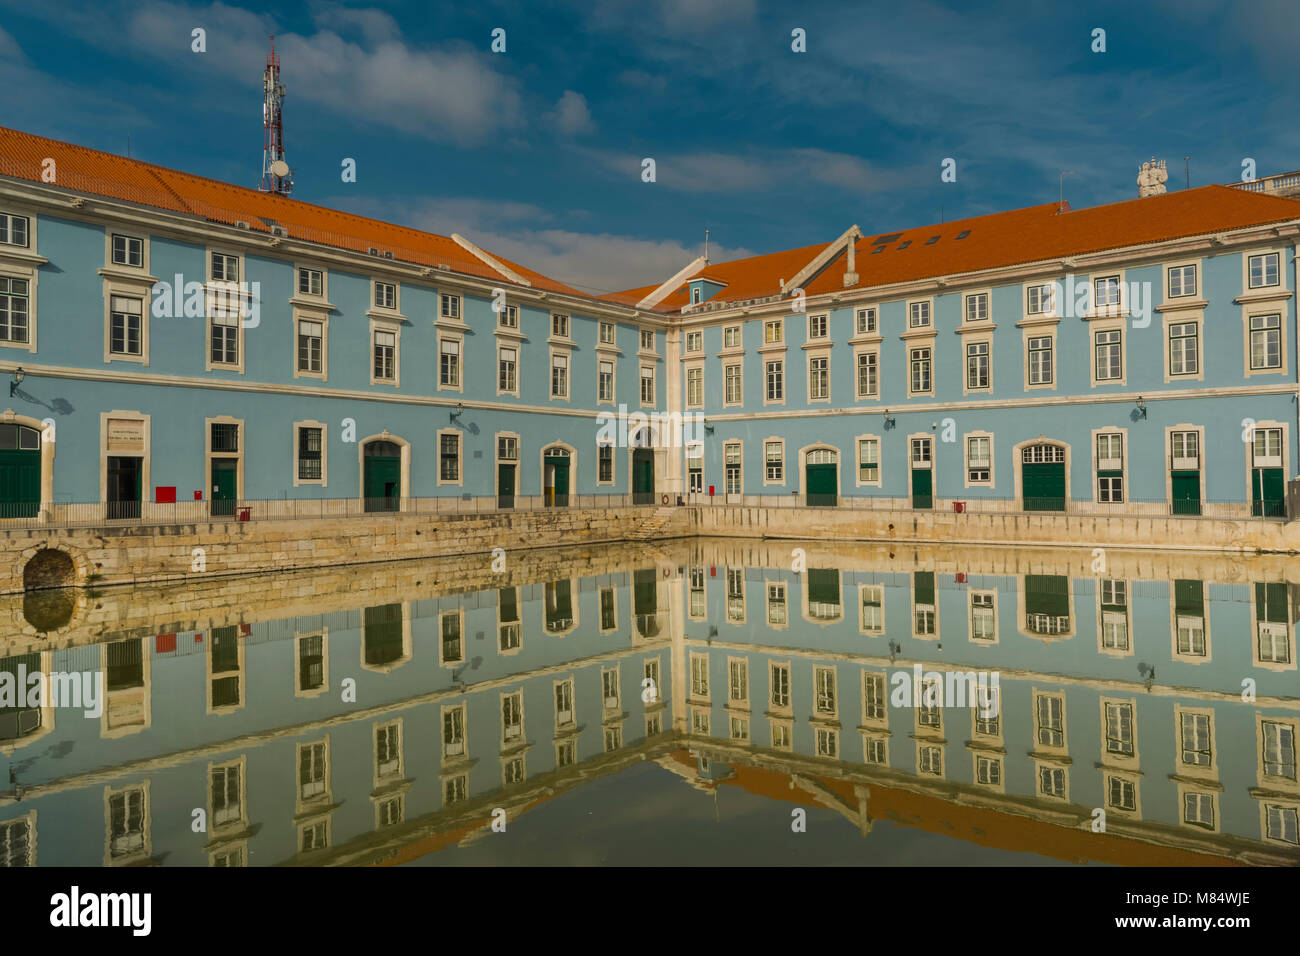 LISBON / PORTUGAL - FEBRUARY 17 2018: BLUE BUILDING REFLECTION IN WATER Stock Photo